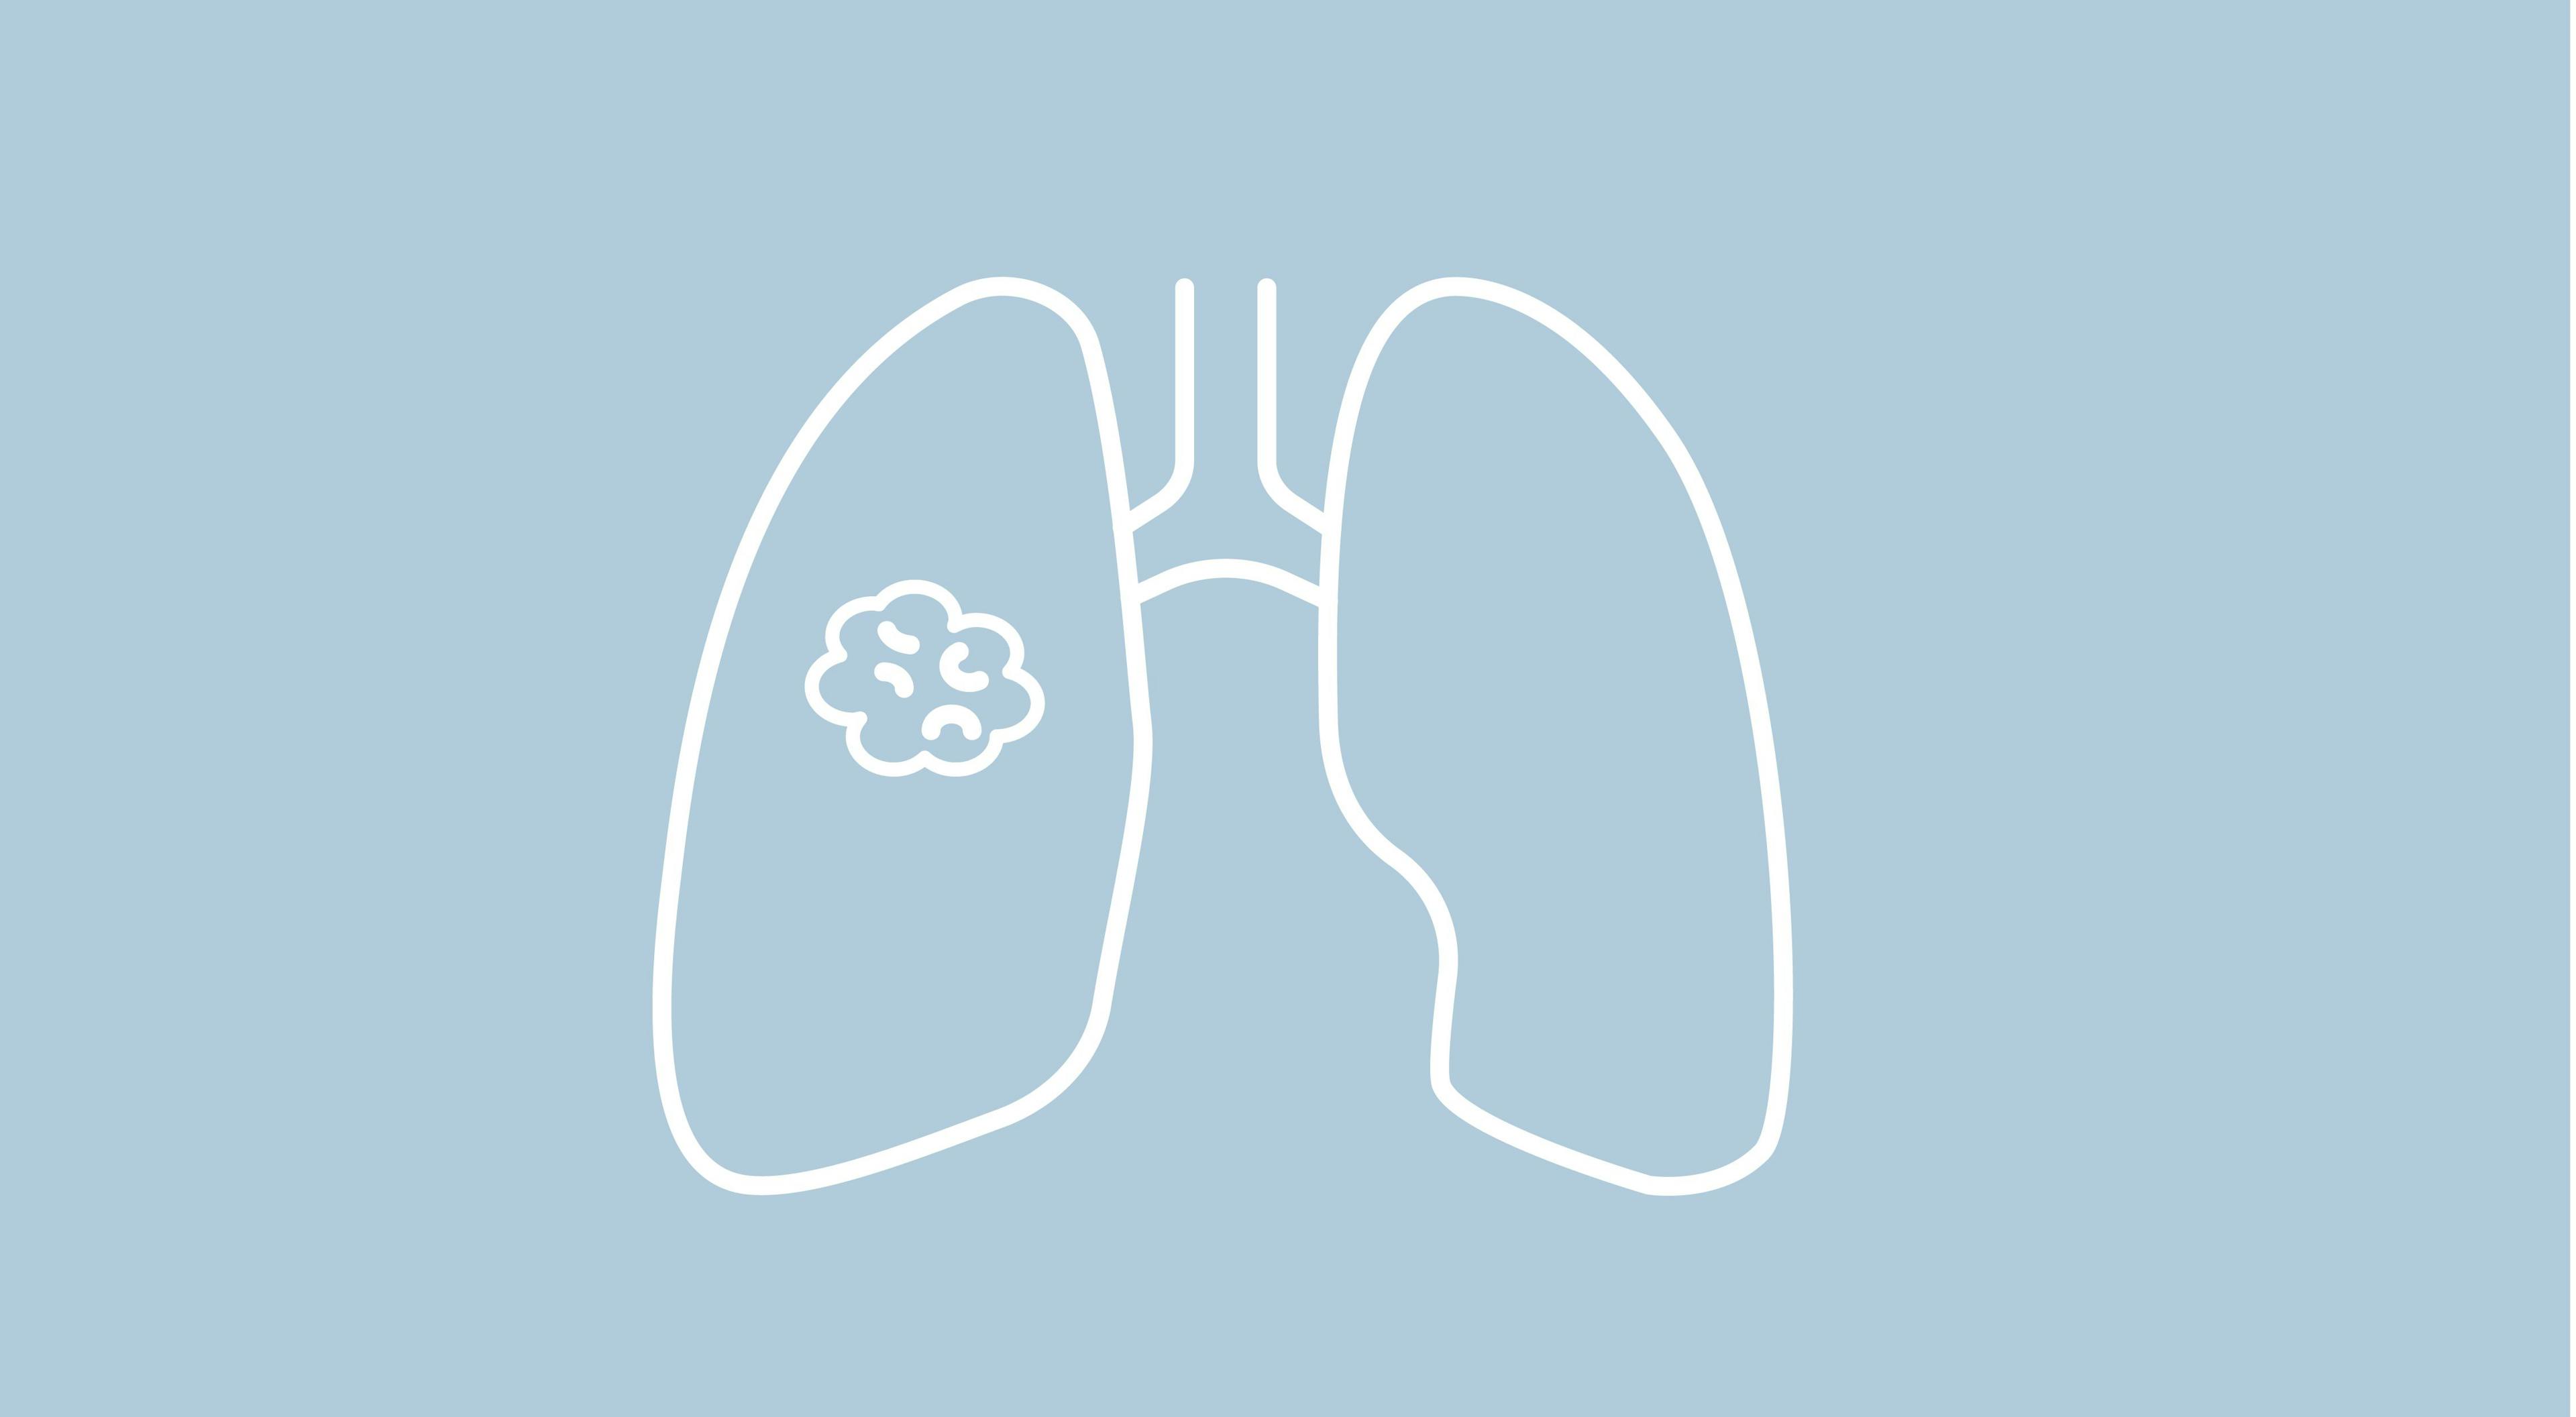 Even After Diagnosis, Patients with Lung Cancer Benefit from Smoking Cessation 